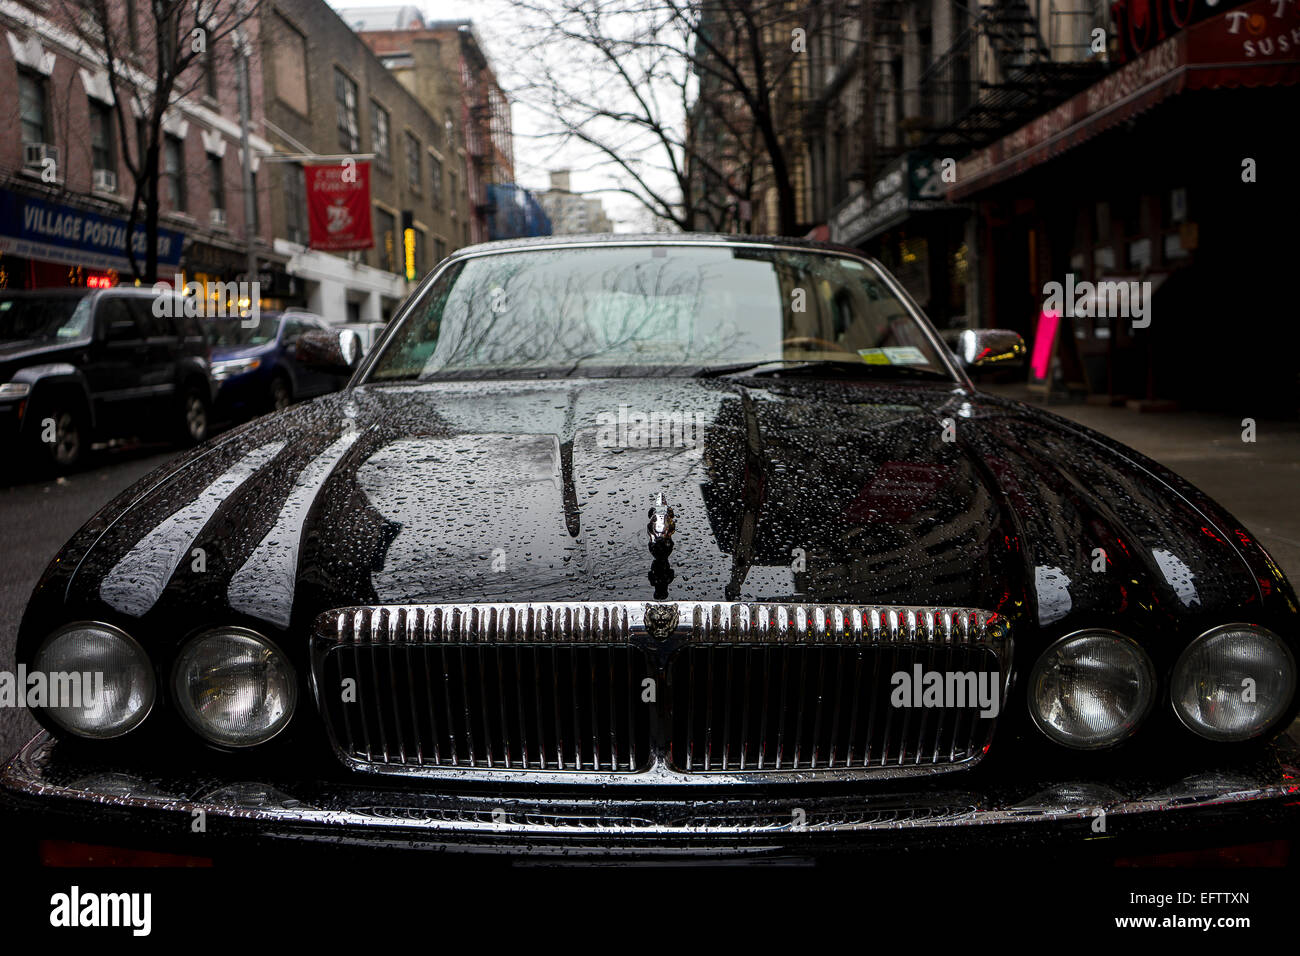 Jaguar parked in the streets of new york Stock Photo